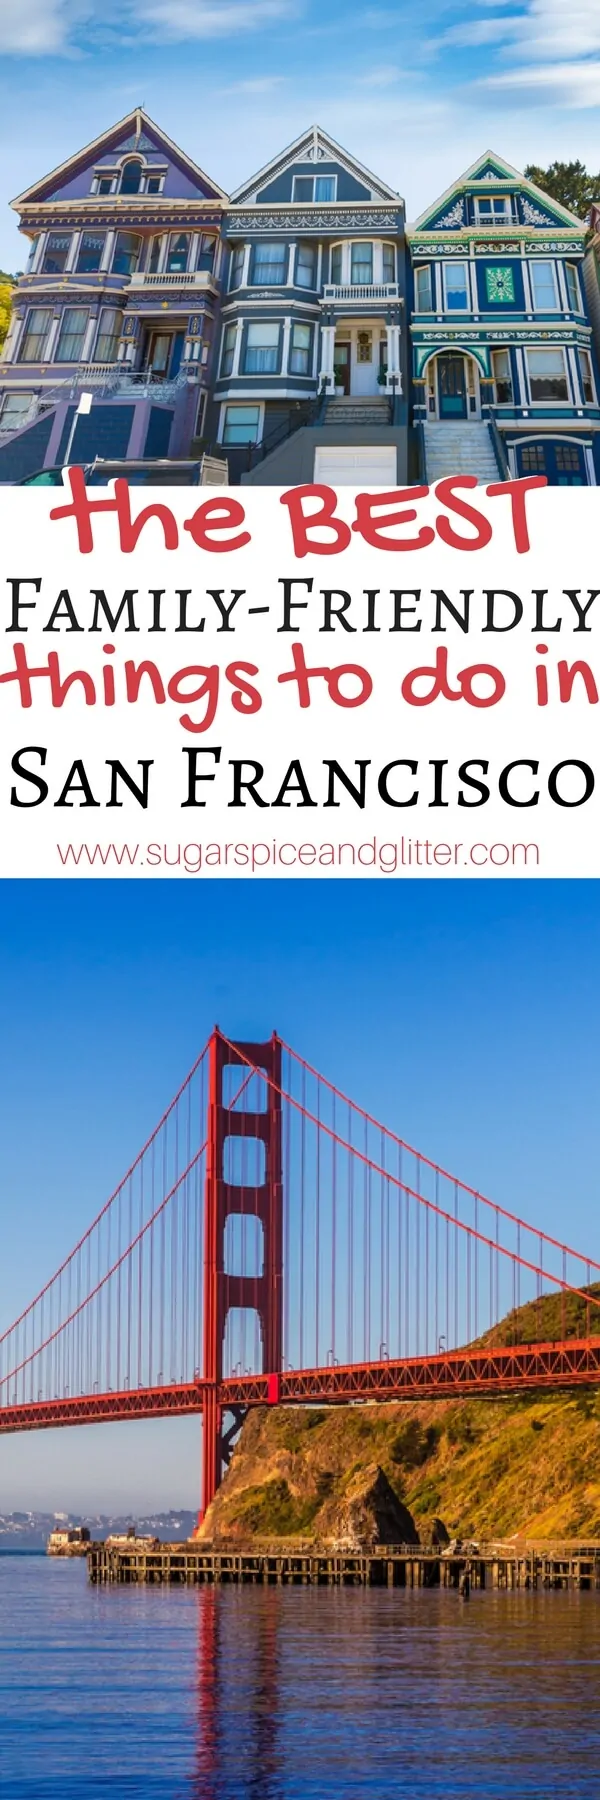 The BEST Family-friendly things to do in San Francisco on a budget. This list is awesome if you're travelling to San Fran or even if you're local